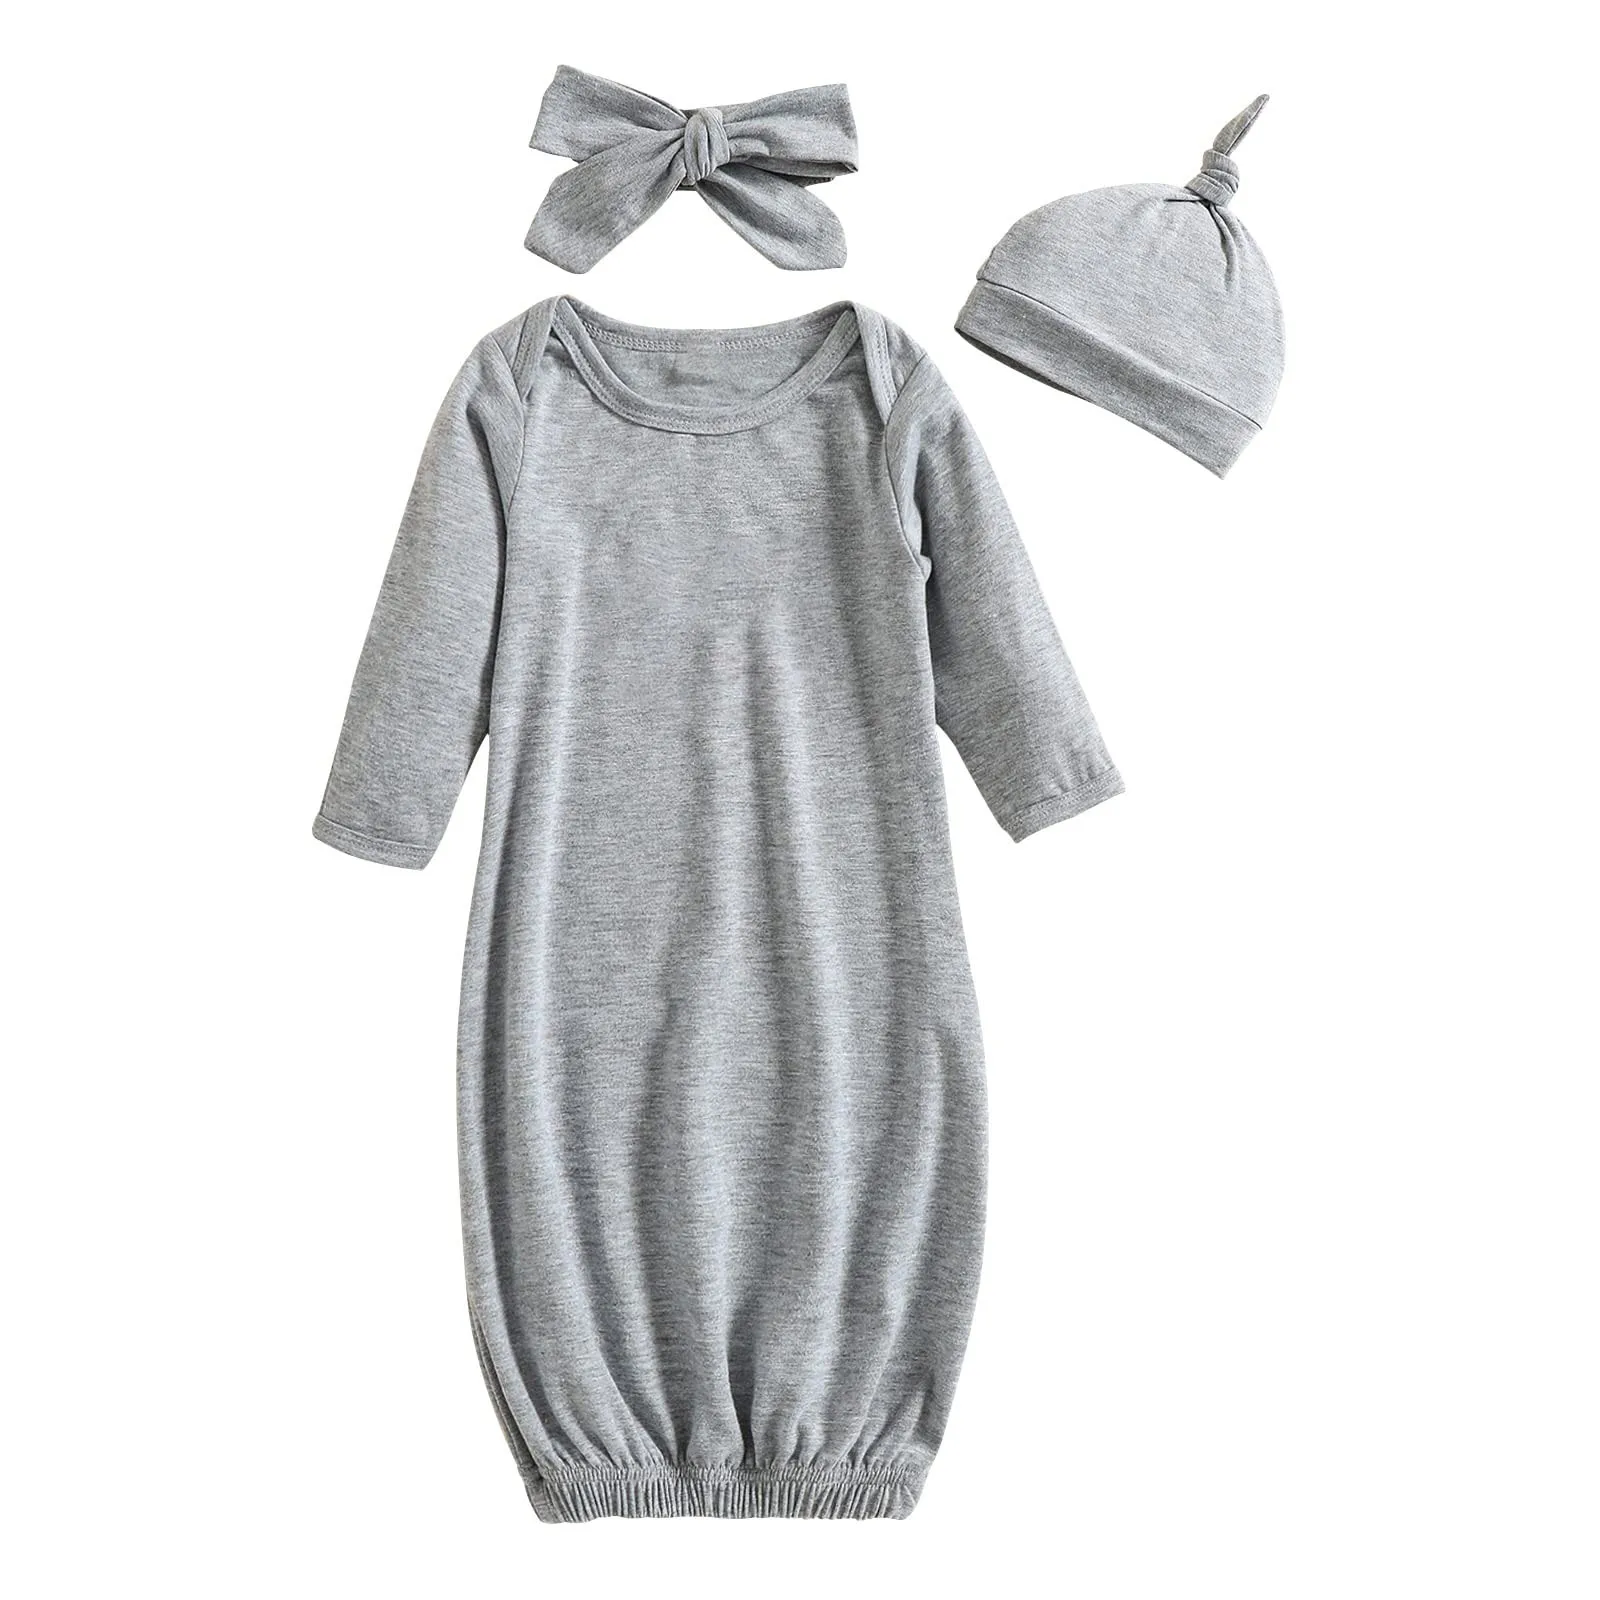 Newborn Baby Girl Little Sister Sleeper Gown Stripe Long Sleeve Nightgown Outfit 